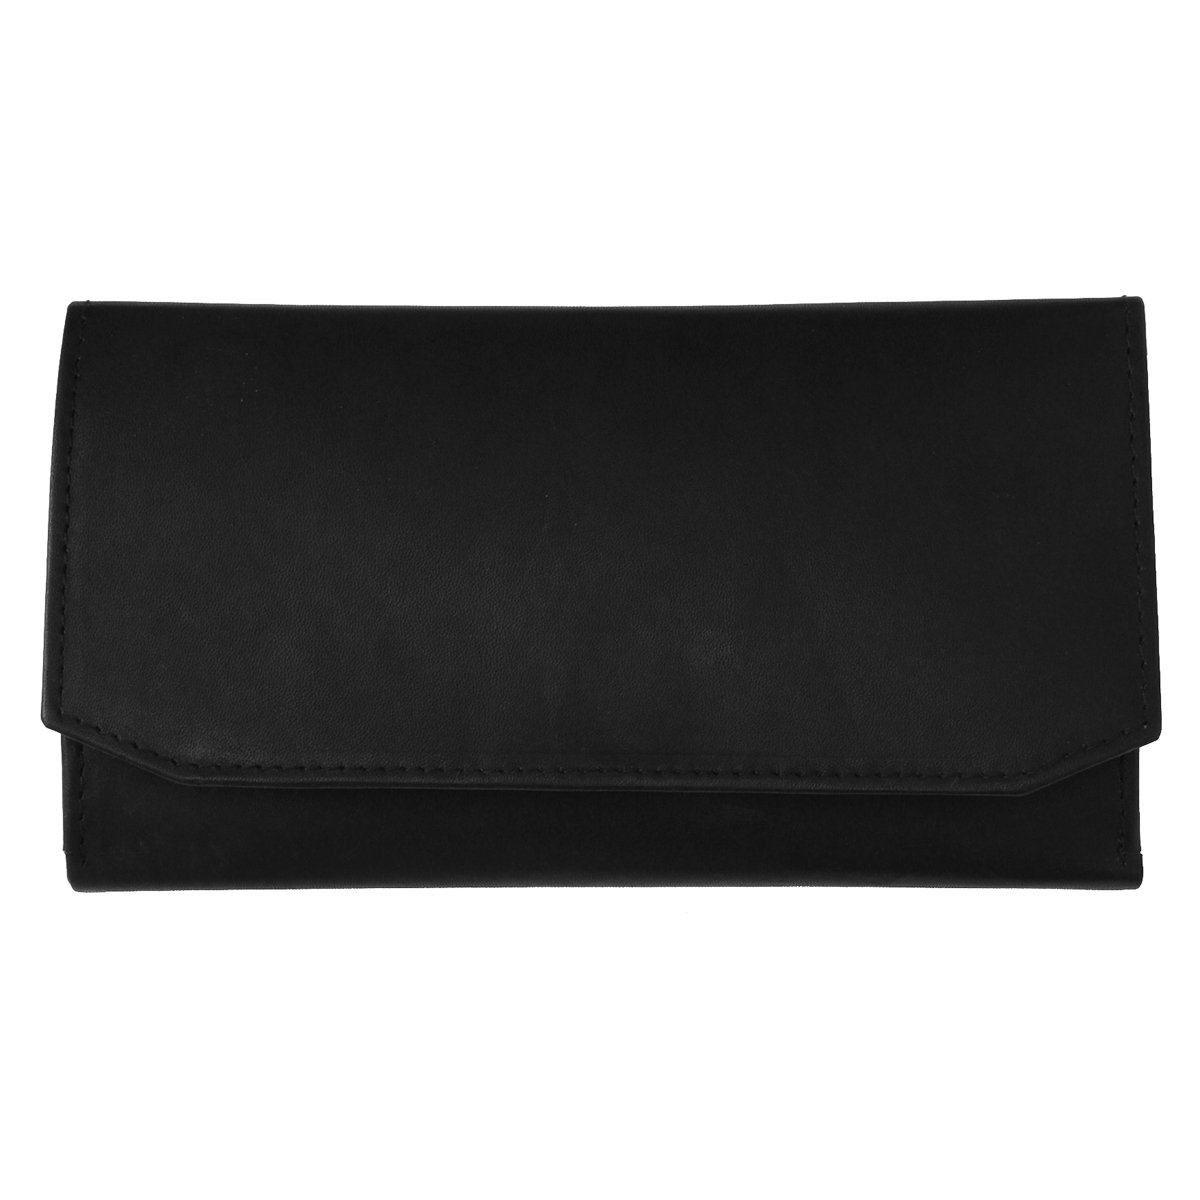 The Timeless Leather Tri-fold Women Wallet